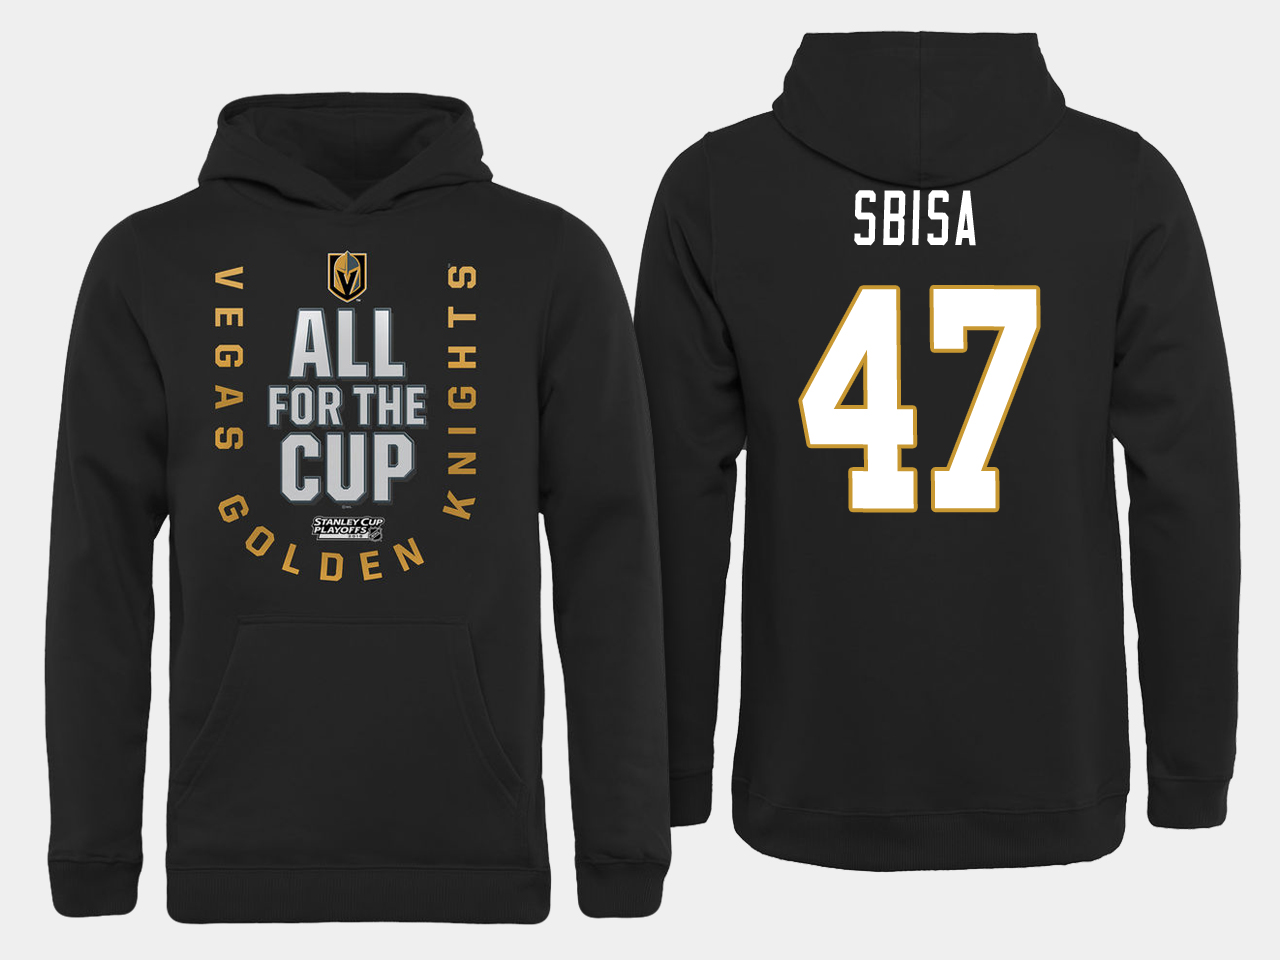 Men NHL Vegas Golden Knights #47 Sbisa All for the Cup hoodie->pittsburgh penguins->NHL Jersey